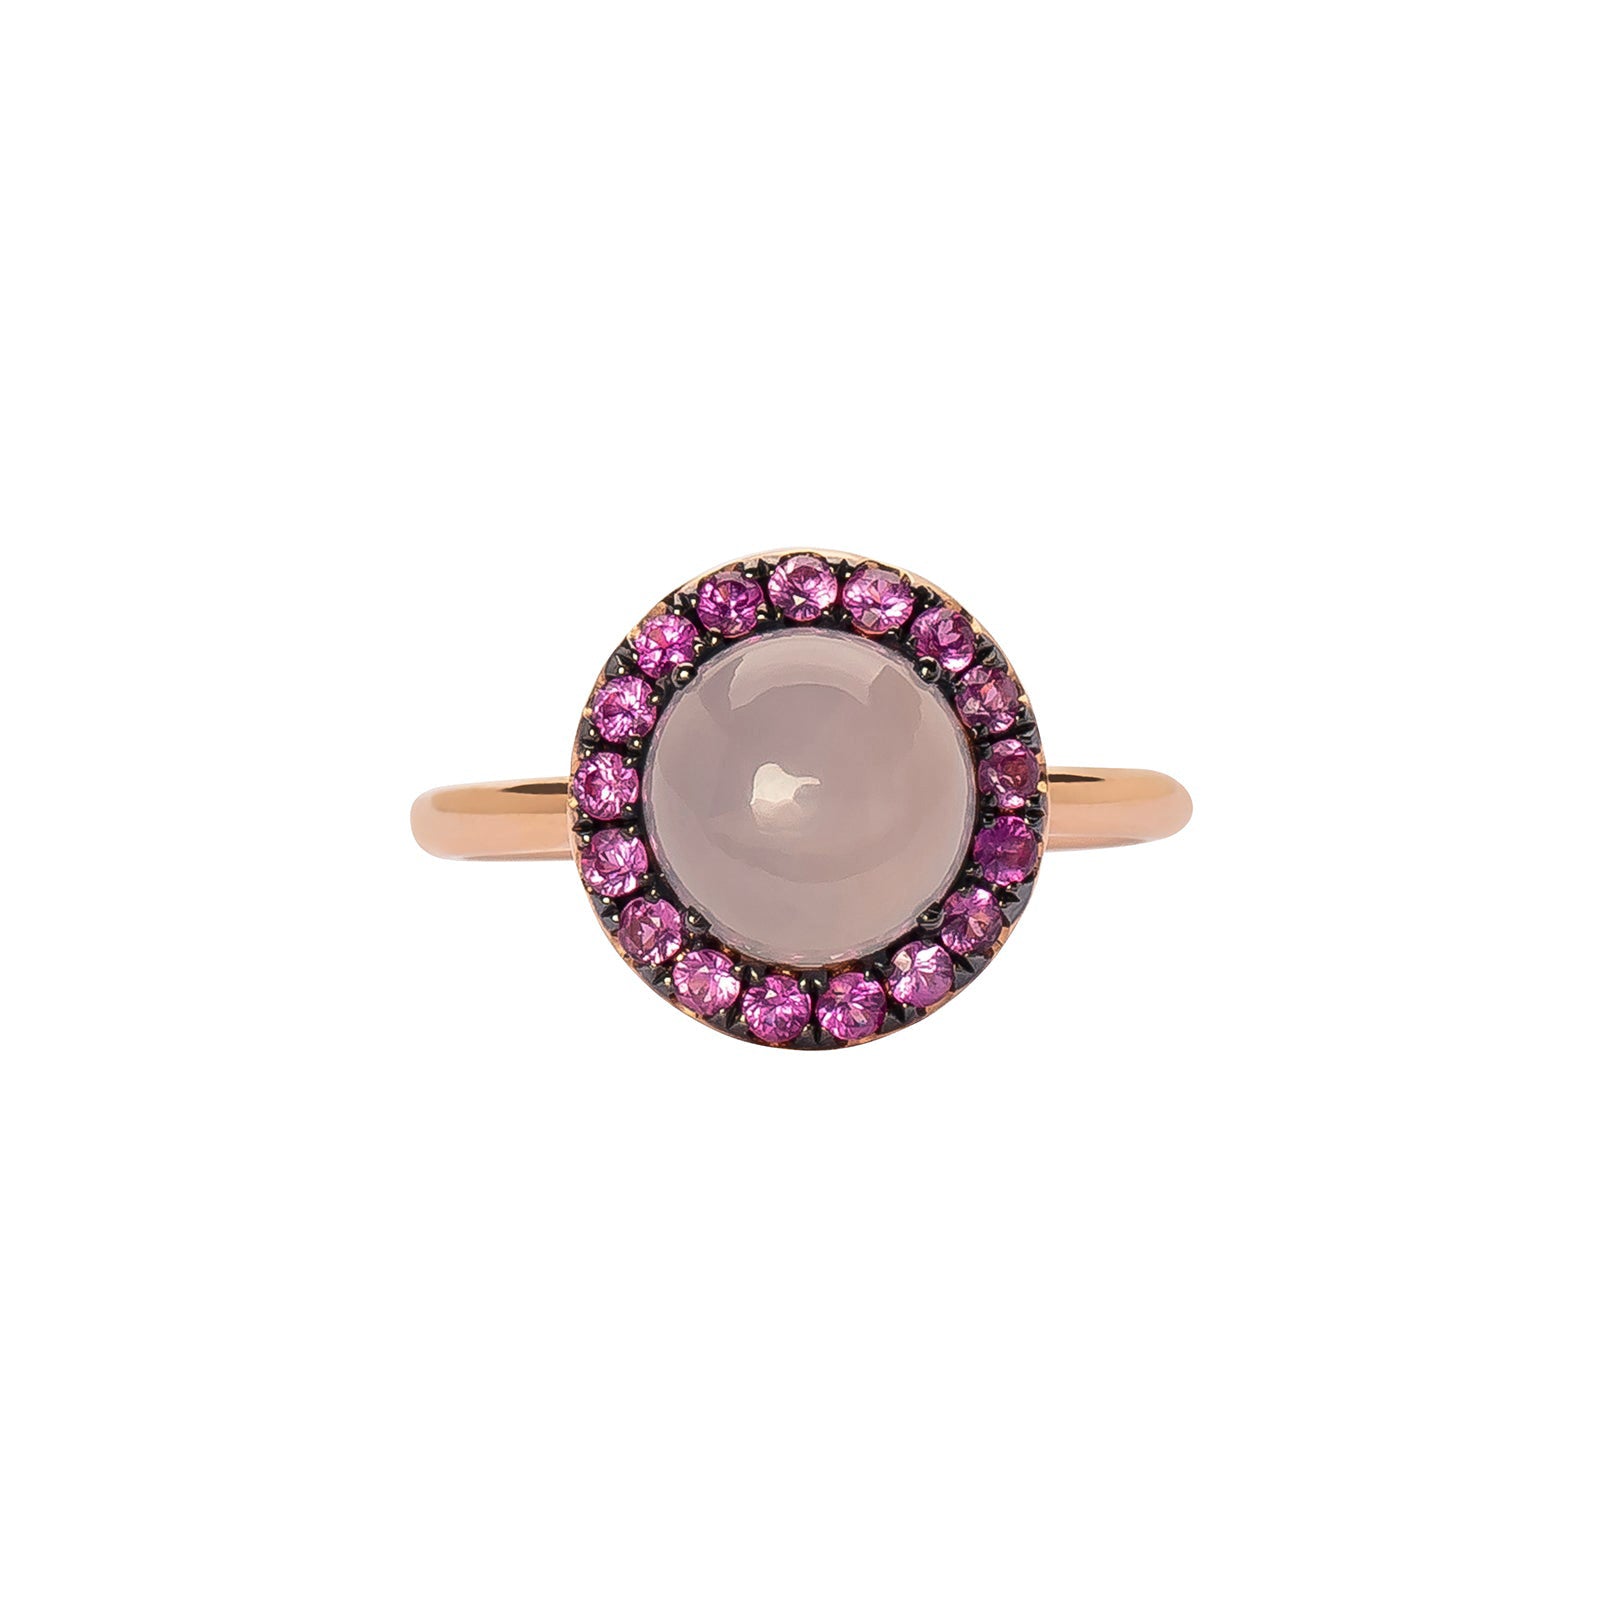 ROUND CABOCHON GEM RINGS